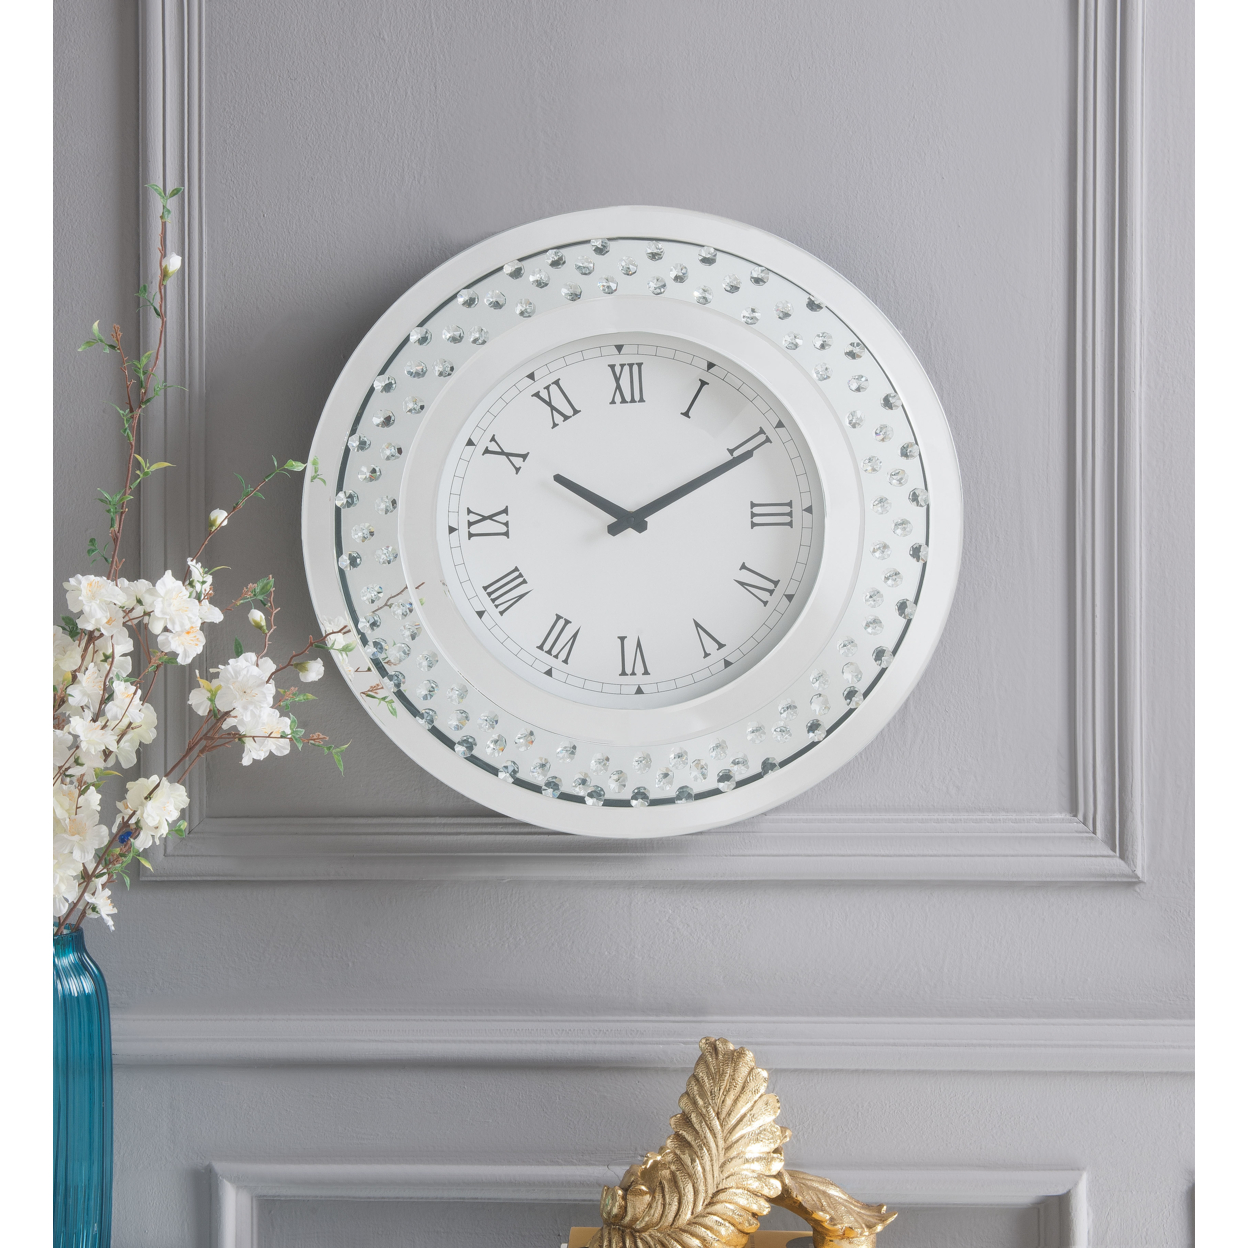 20 Inch Analog Wall Clock, Round Mirror Frame, Faux Crystals Inlay, White